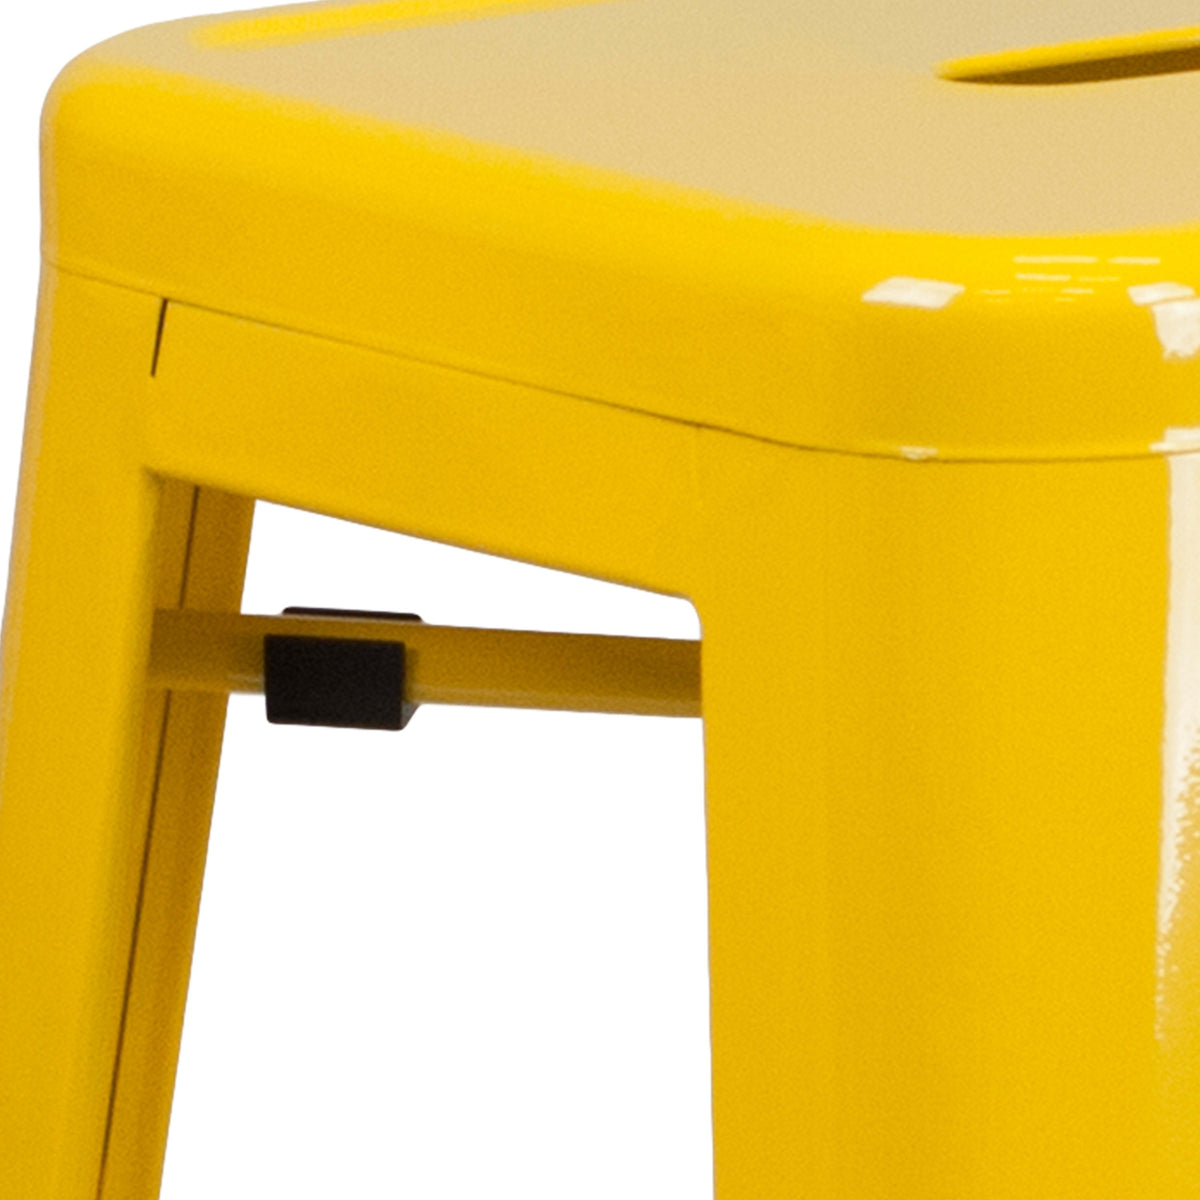 Yellow |#| Commercial Grade 30inchH Backless Yellow Metal Indoor-Outdoor Barstool, Square